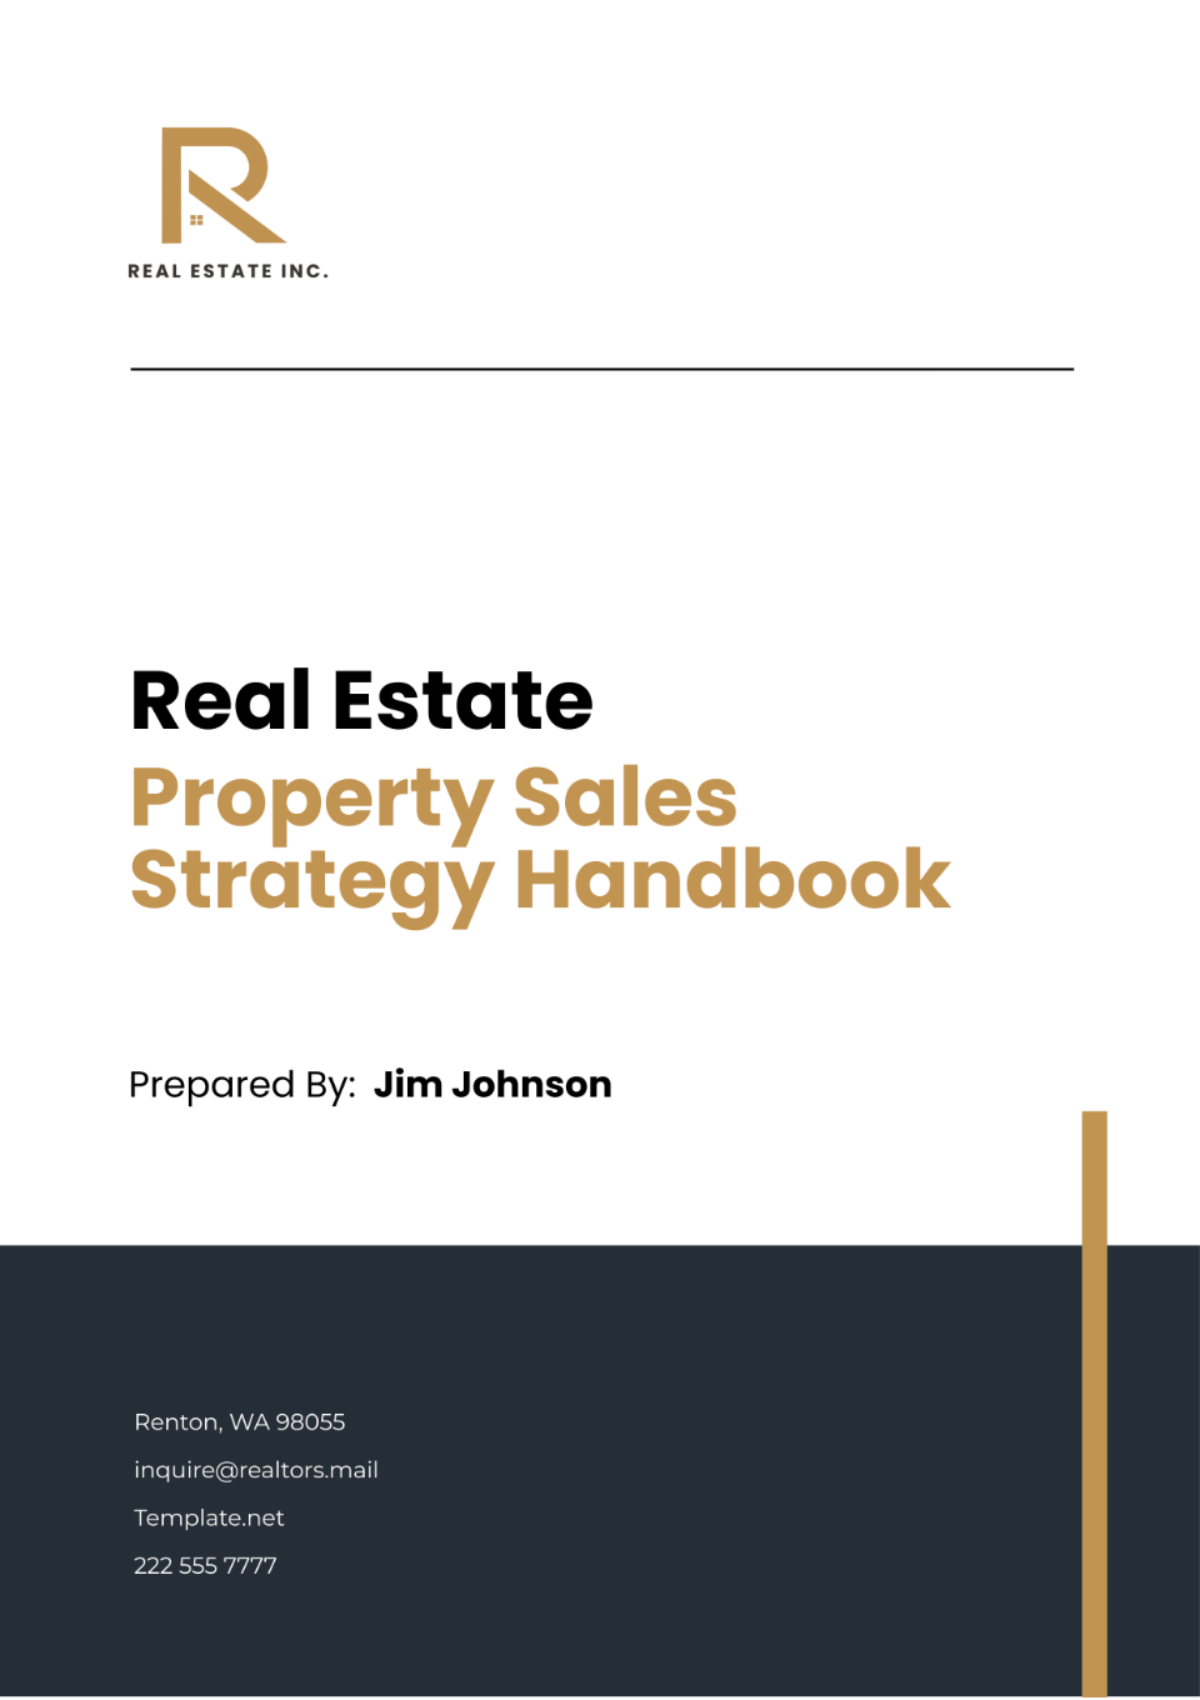 Real Estate Property Sales Strategy Handbook Template